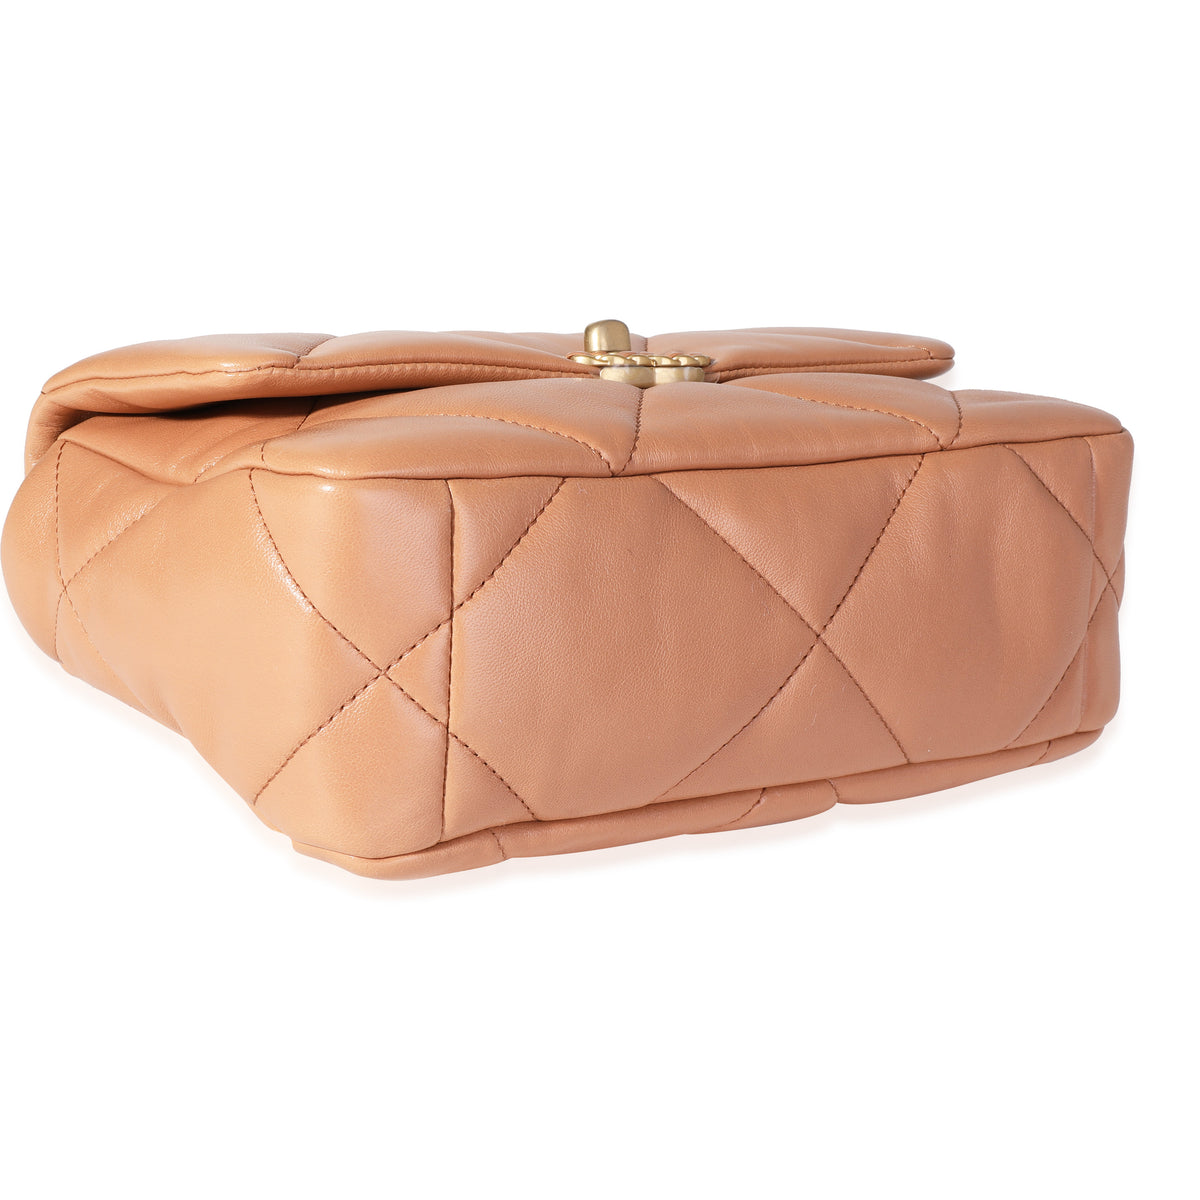 Chanel Tan Quilted Lambskin Medium Chanel 19 Bag